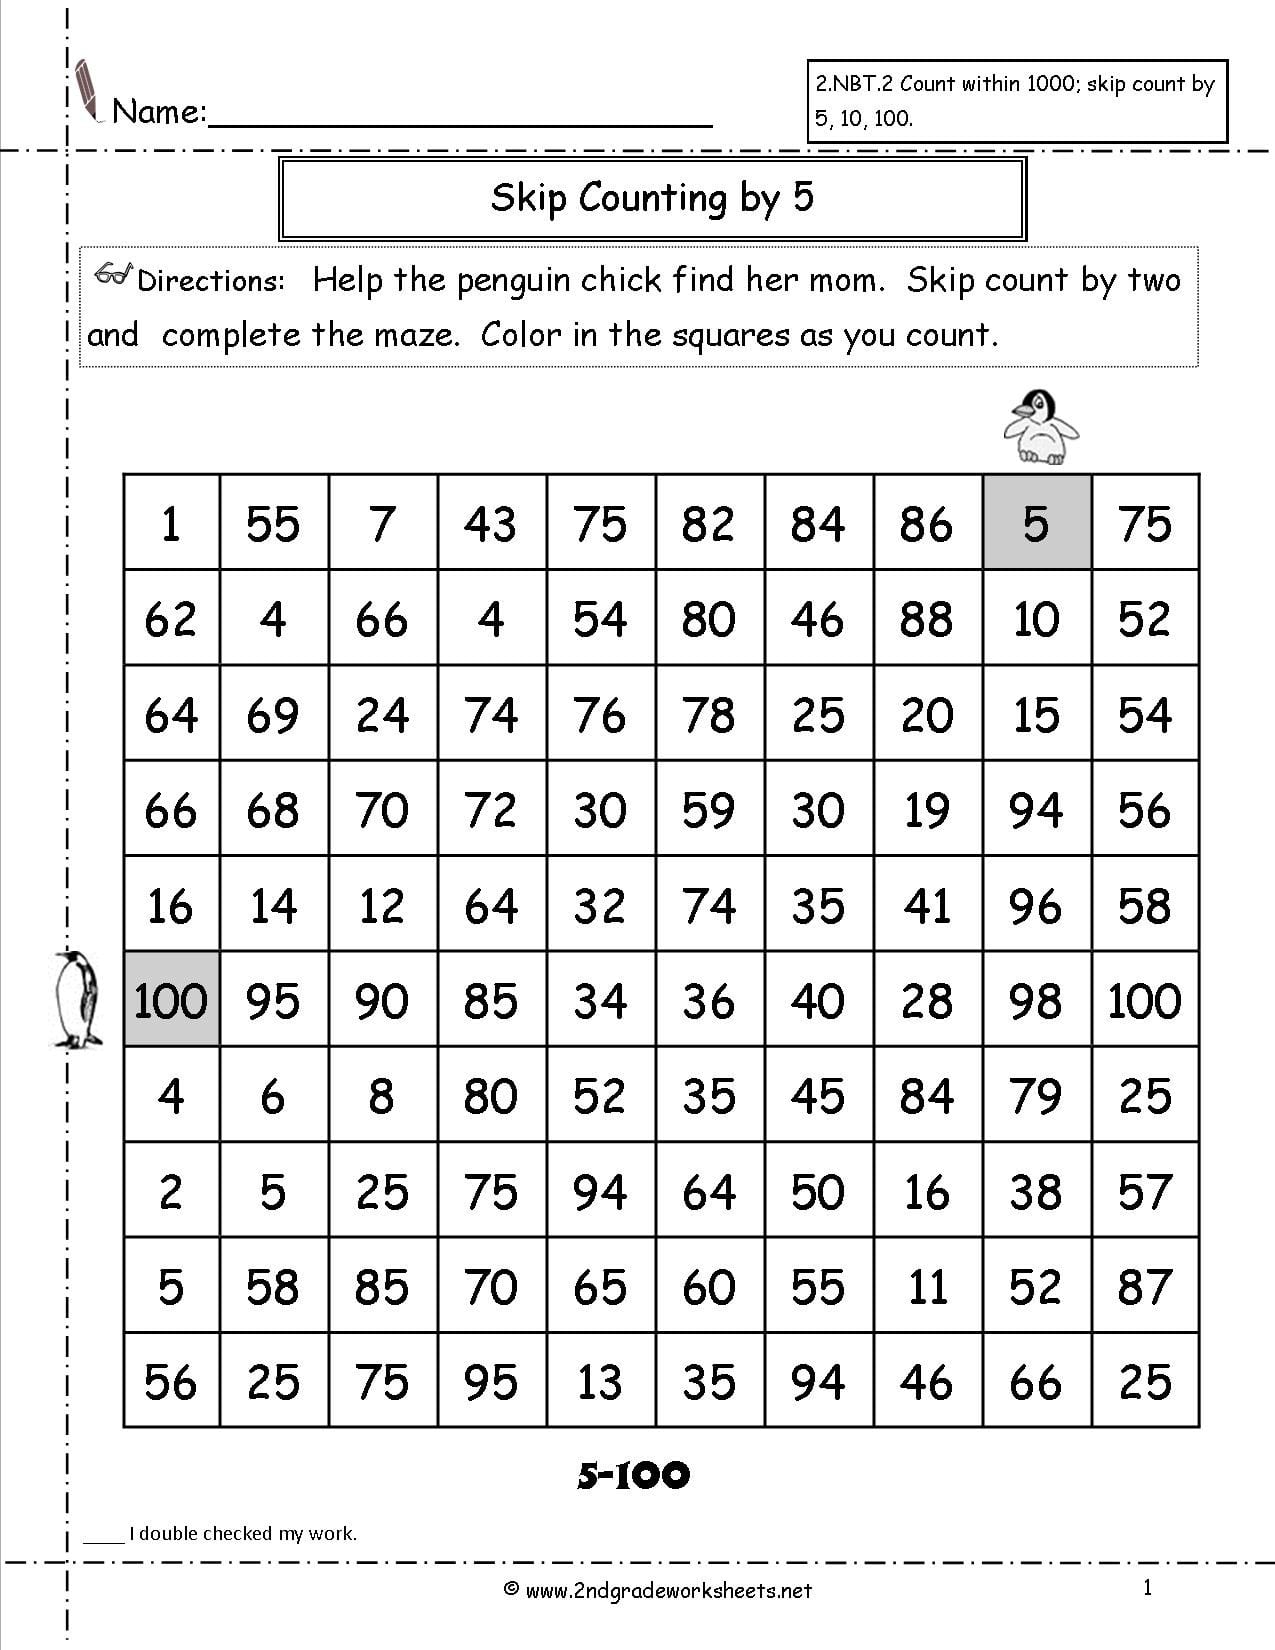 free-skip-counting-worksheets-db-excel